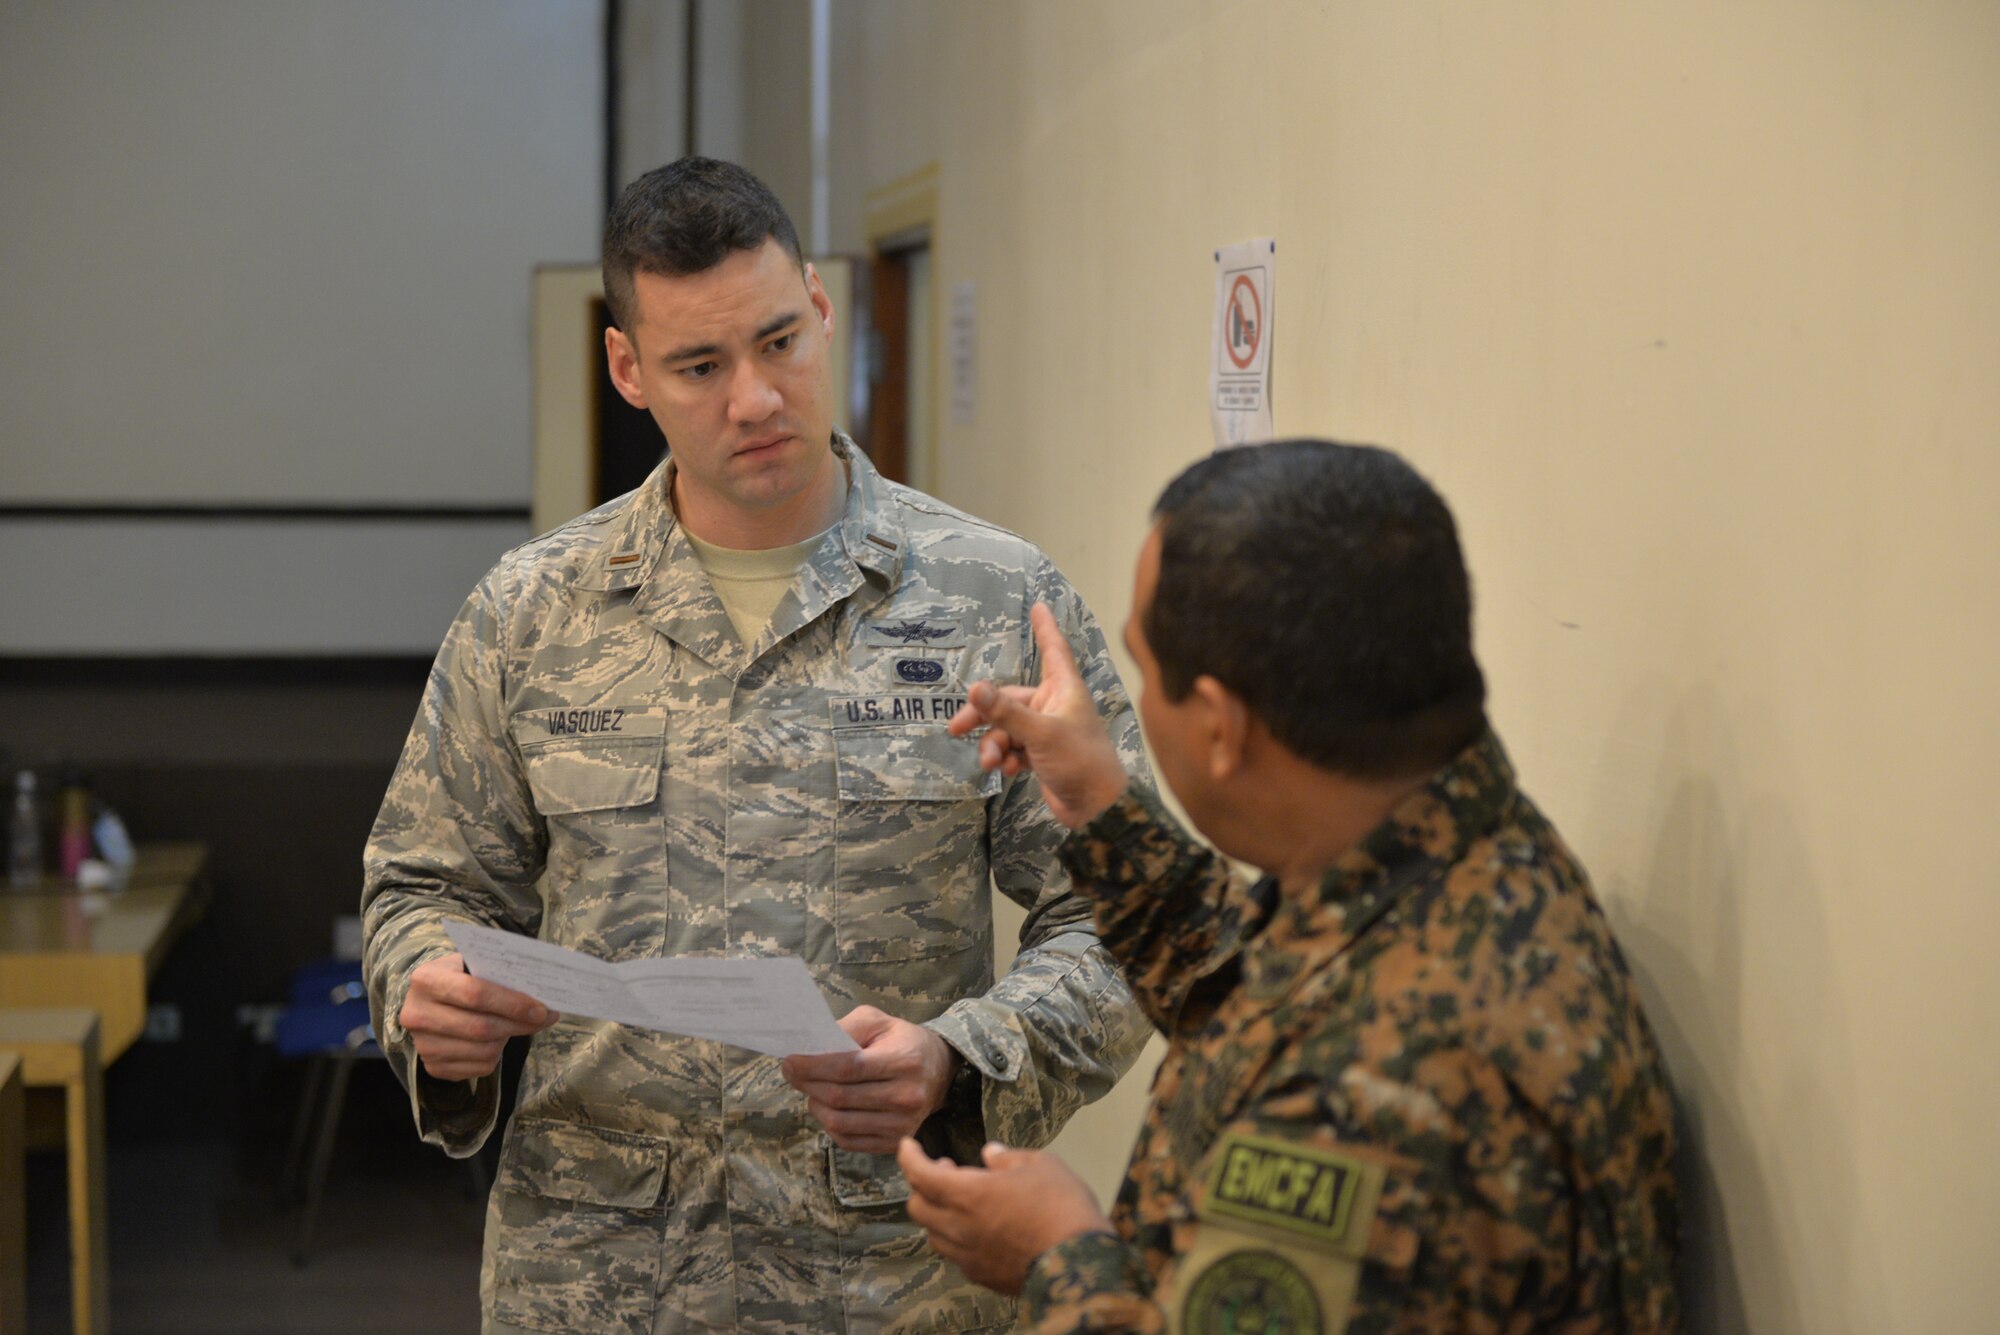 U.S. Air Force 2nd Lt. Darrin Vasquez, an operations officer with the 175th Communications Flight, Maryland Air National Guard and Maj. Javier Campos, Chief Officer of Communications CVI, La Fuerza Armada de El Salvador, discuss the morning schedule, San Salvador, El Salvador, Sept. 27, 2018. Vasquez is part of a multi-state National Guard State Partnership Program, headed by the New Hampshire National Guard, in order to help assess and determine recommendations for the Salvadoran Army as they stand up a cyber security unit. (N.H. Air National Guard photo by Tech. Sgt. Aaron Vezeau)